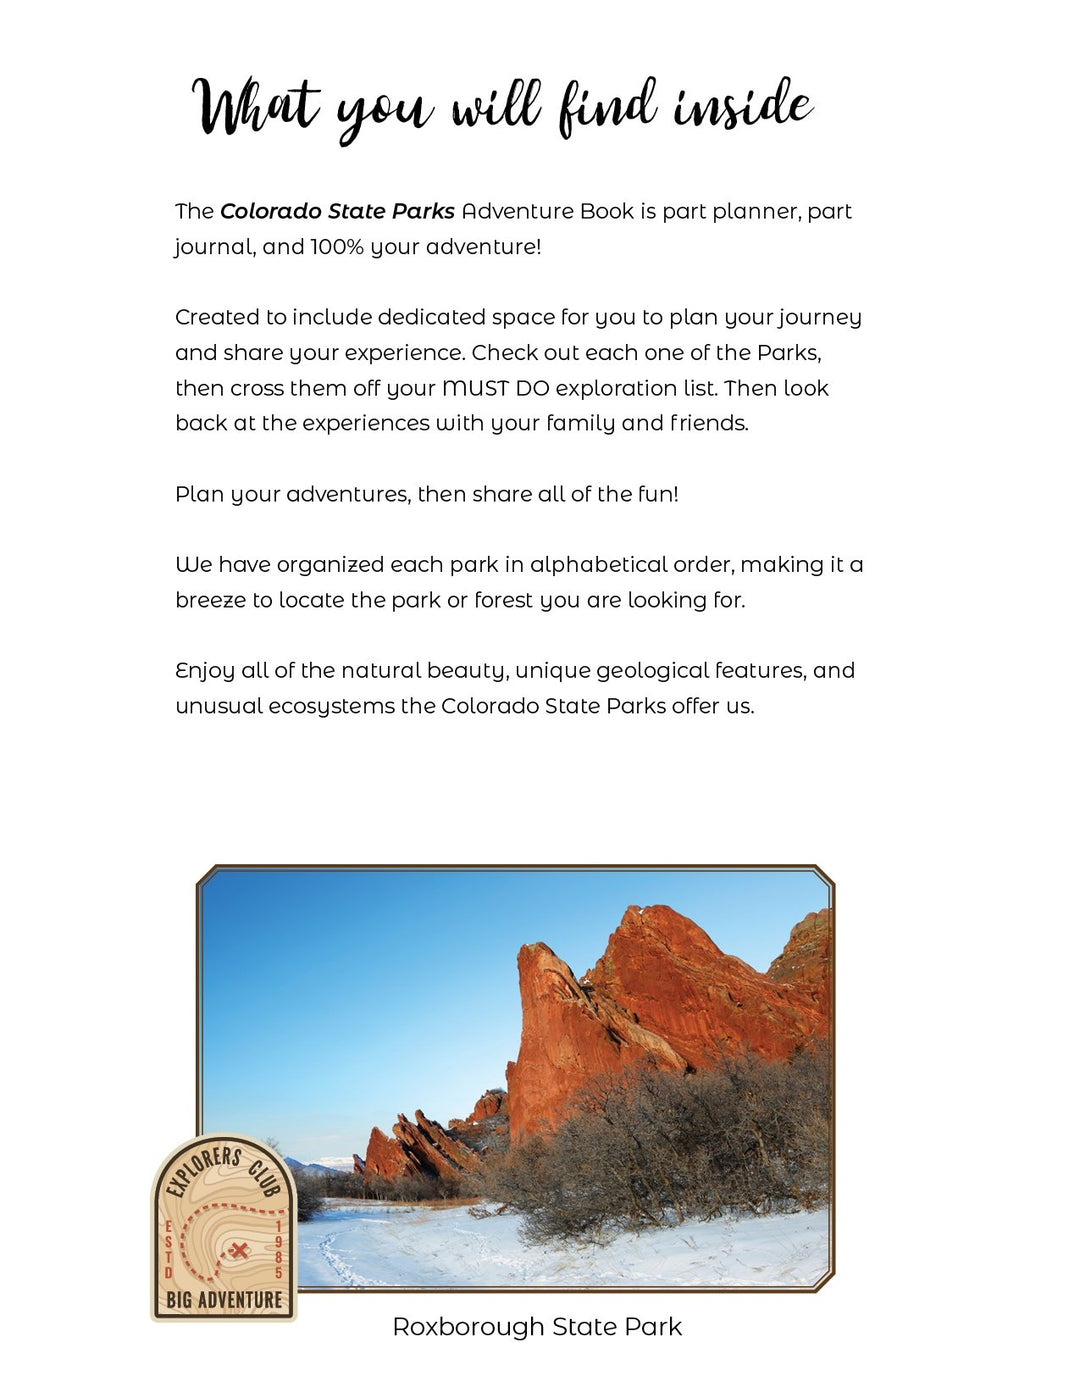 Colorado State Parks - Adventure Planning Journal - My Nature Book Adventures